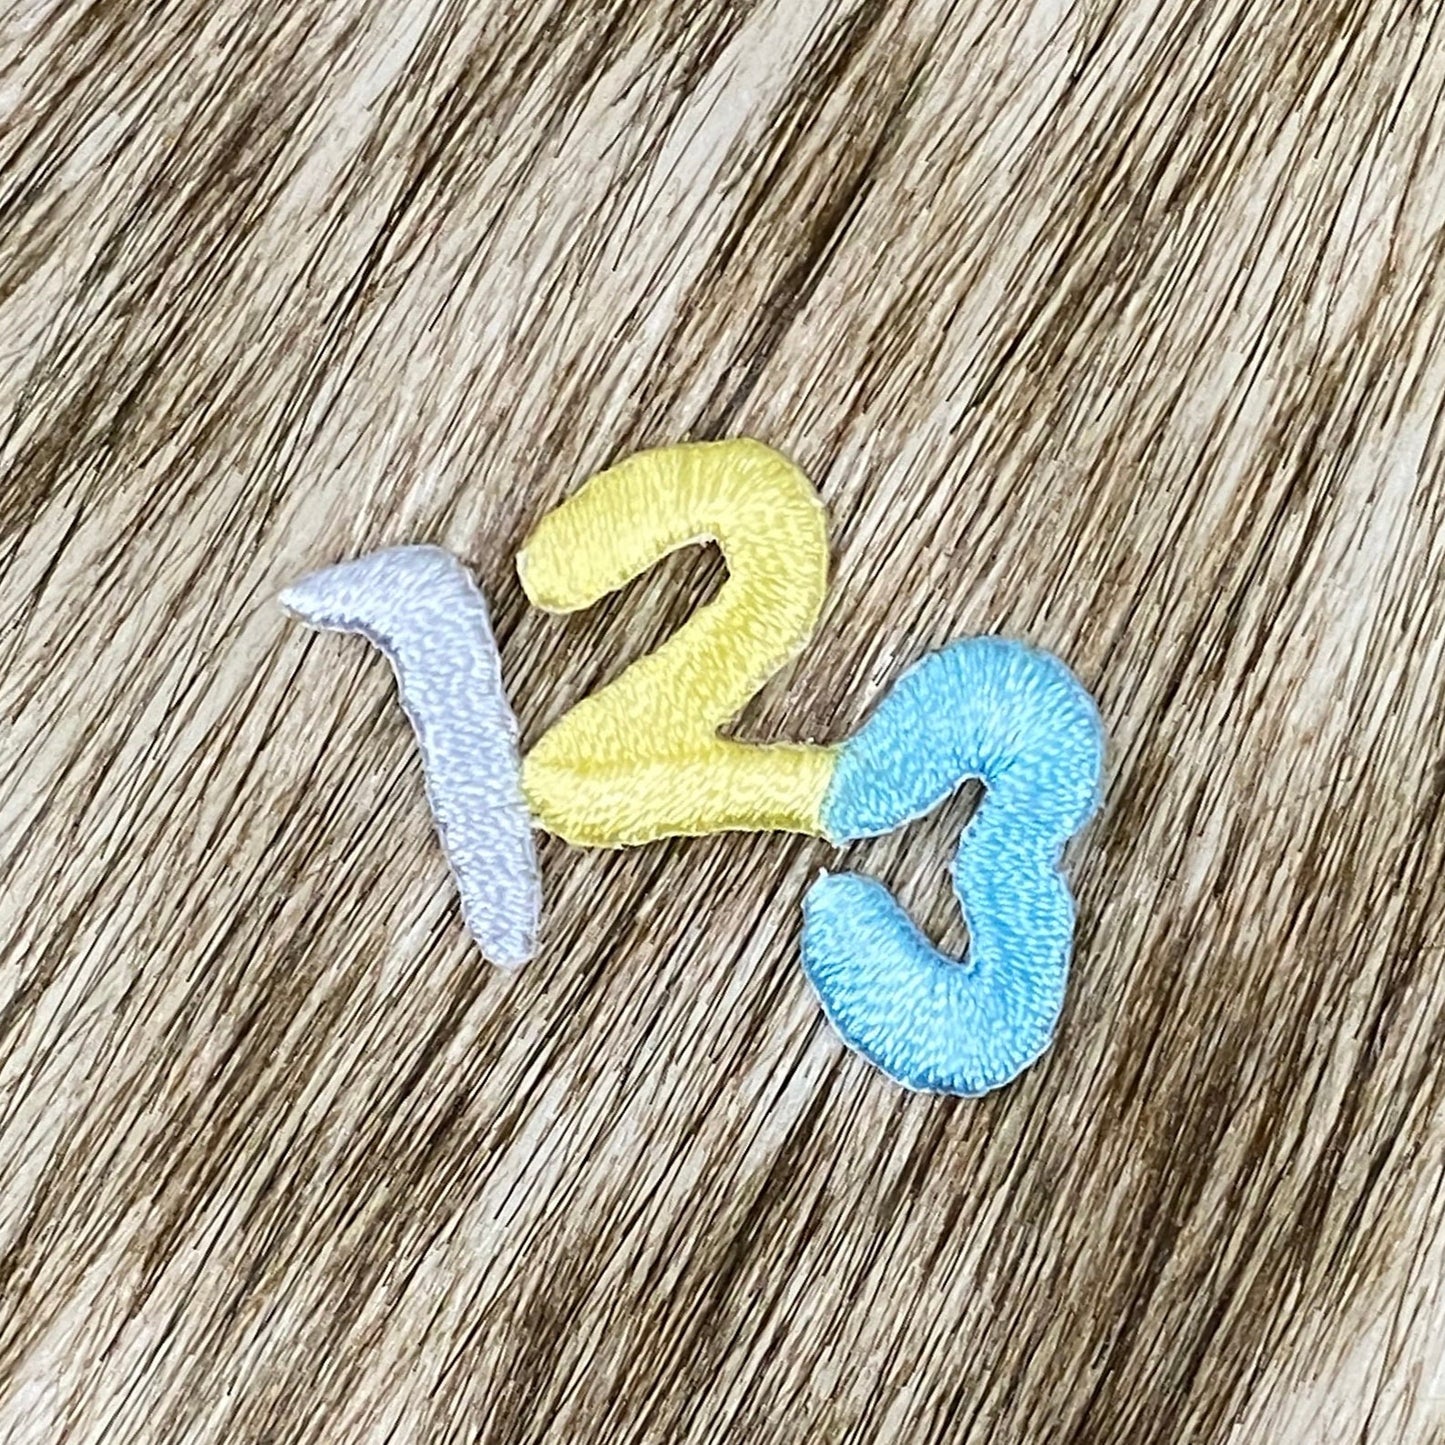 Numbers 123 - Baby Pastel Blue and Yellow